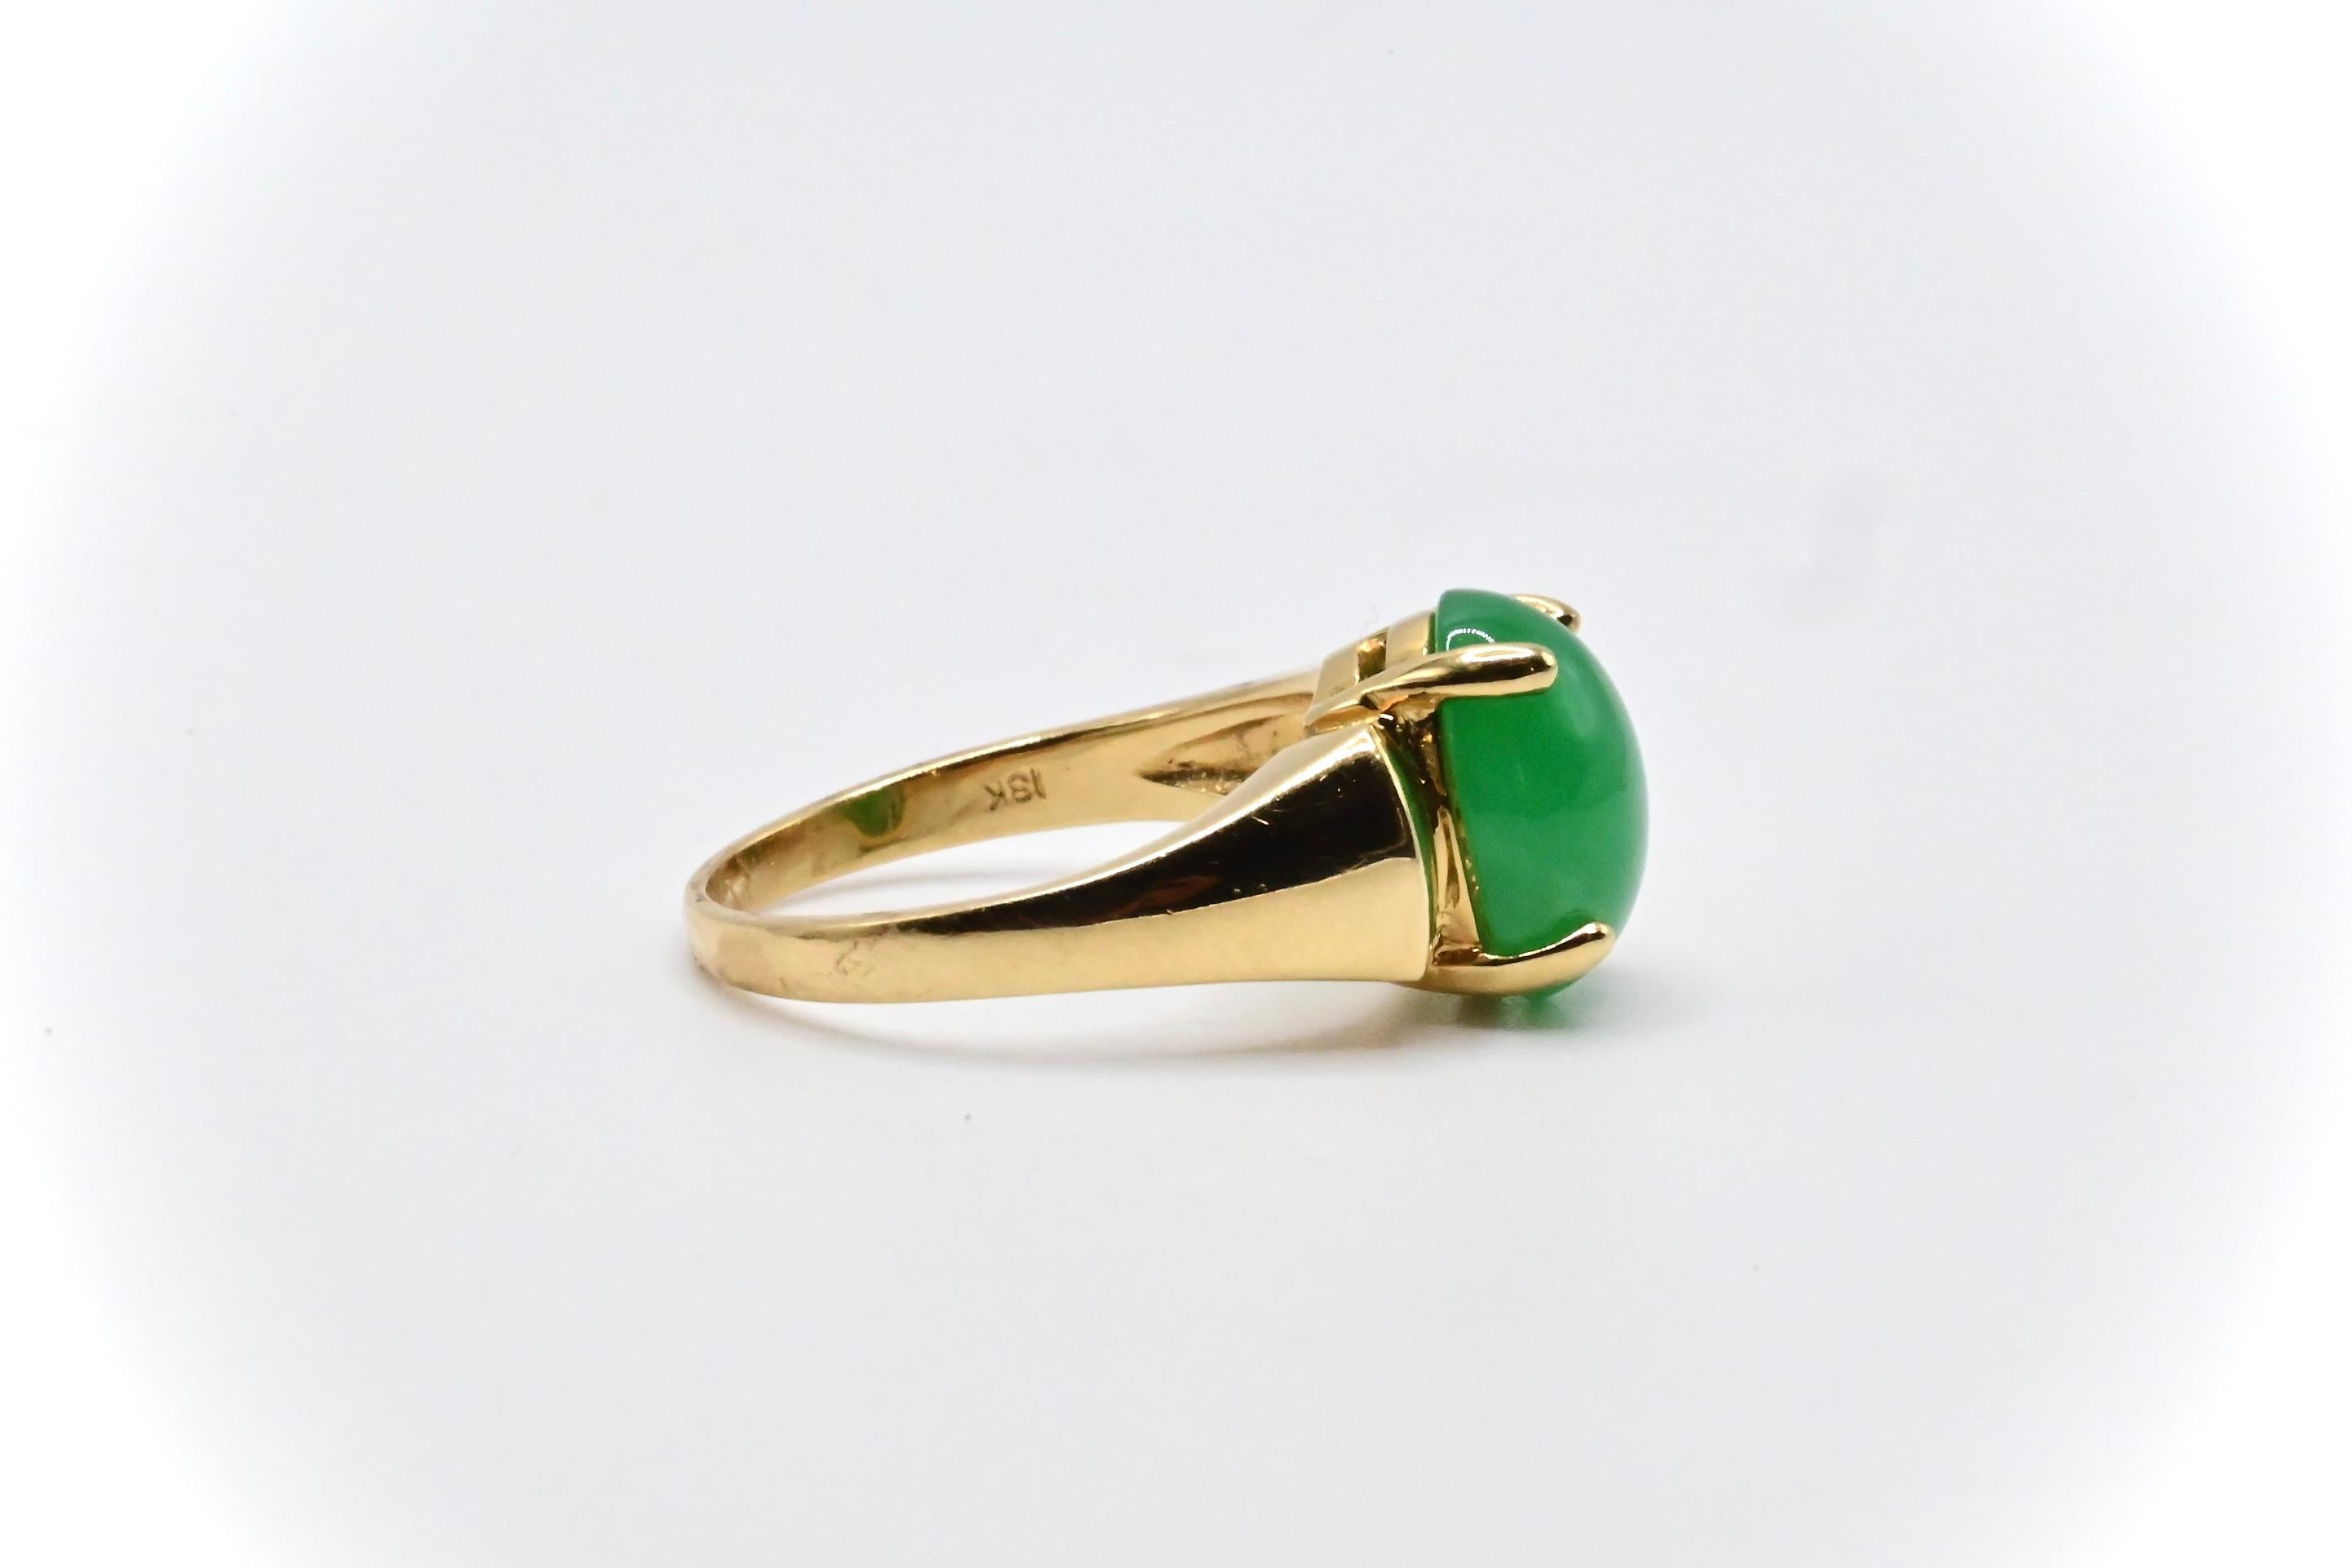 This is a simple, yet elegant 18k yellow gold ring with a beautiful oval jade in the middle with round diamond accents. It’s a size 6, and weighs approximately 4 grams. It’s in good condition with little wear, and if you have any questions or